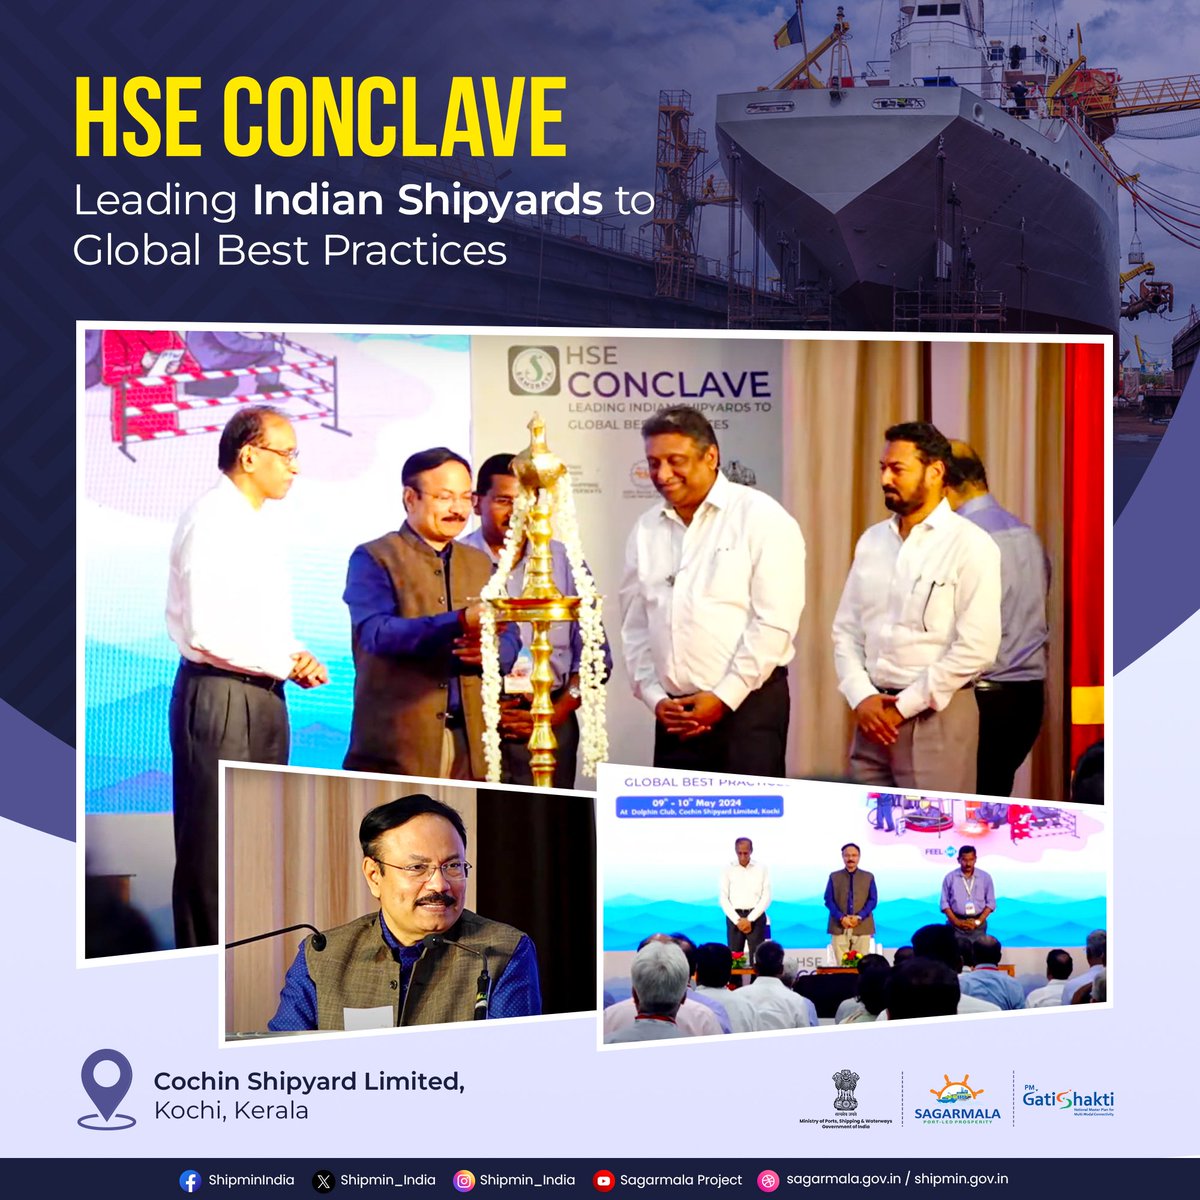 T.K. Ramachandran, IAS, Secretary, MoPSW inaugurated HSE Conclave hosted by @cslcochin, today. The event will bring together leading Indian shipyards in a collective endeavor to foster a robust culture of safety & excellence within Indian shipbuilding & ship repair facilities